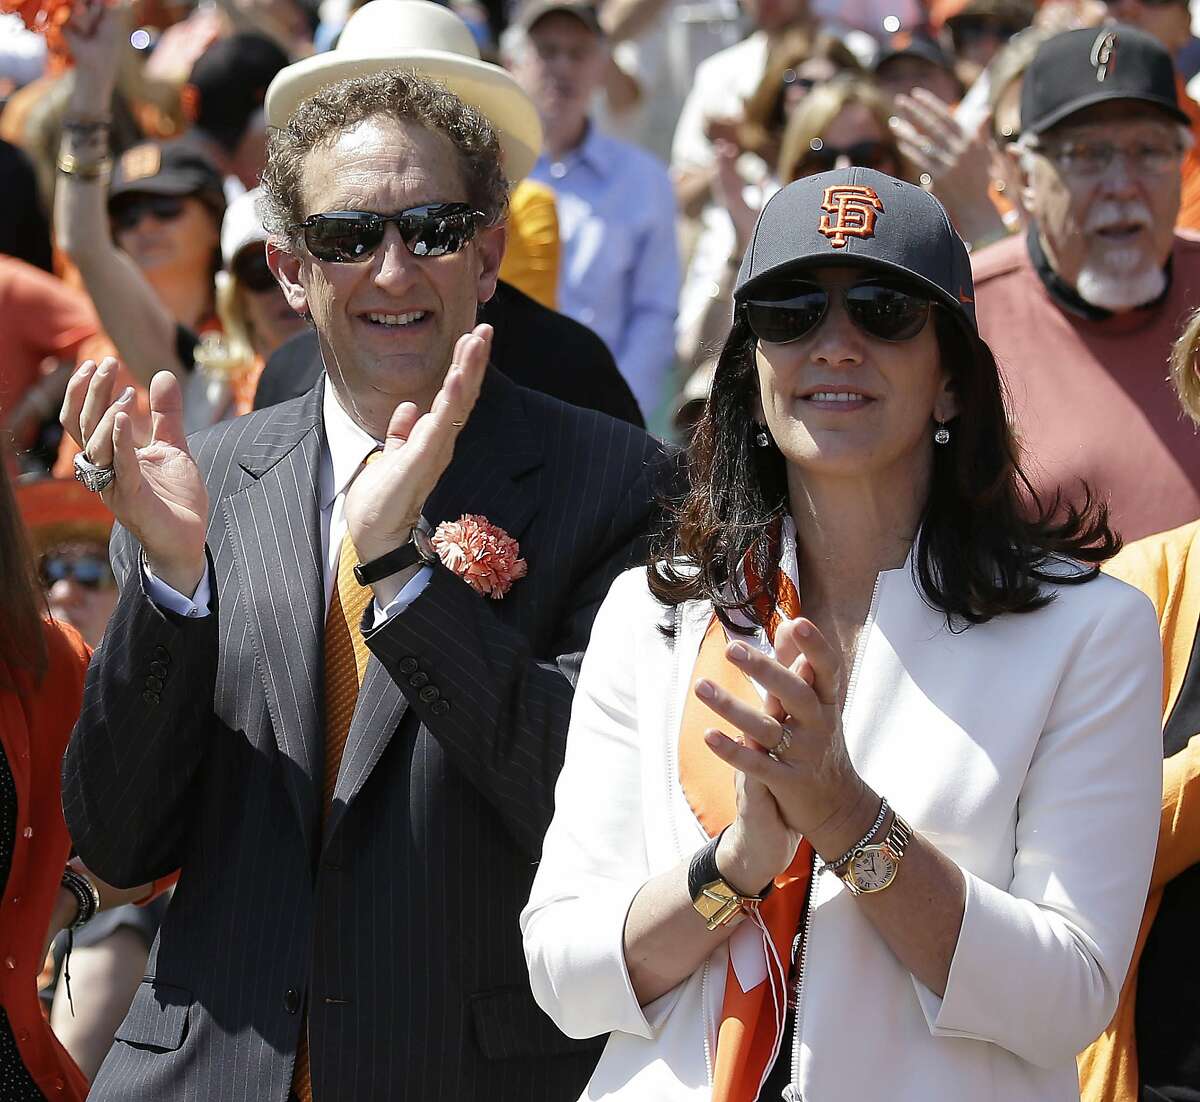 FILE - In this April 8, 2014, file photo, San Francisco Giants president and CEO Larry Baer, and his wife Pam, applaud before an opening day baseball game against the Arizona Diamondbacks, in San Francisco. Baer is taking a leave of absence from the team following the release of a video showing him in a physical altercation with his wife. The Giants board of directors released a statement Monday, March 4, 2019, saying that Baer has been granted a request to take personal time away from the team. (AP Photo/Eric Risberg, File)